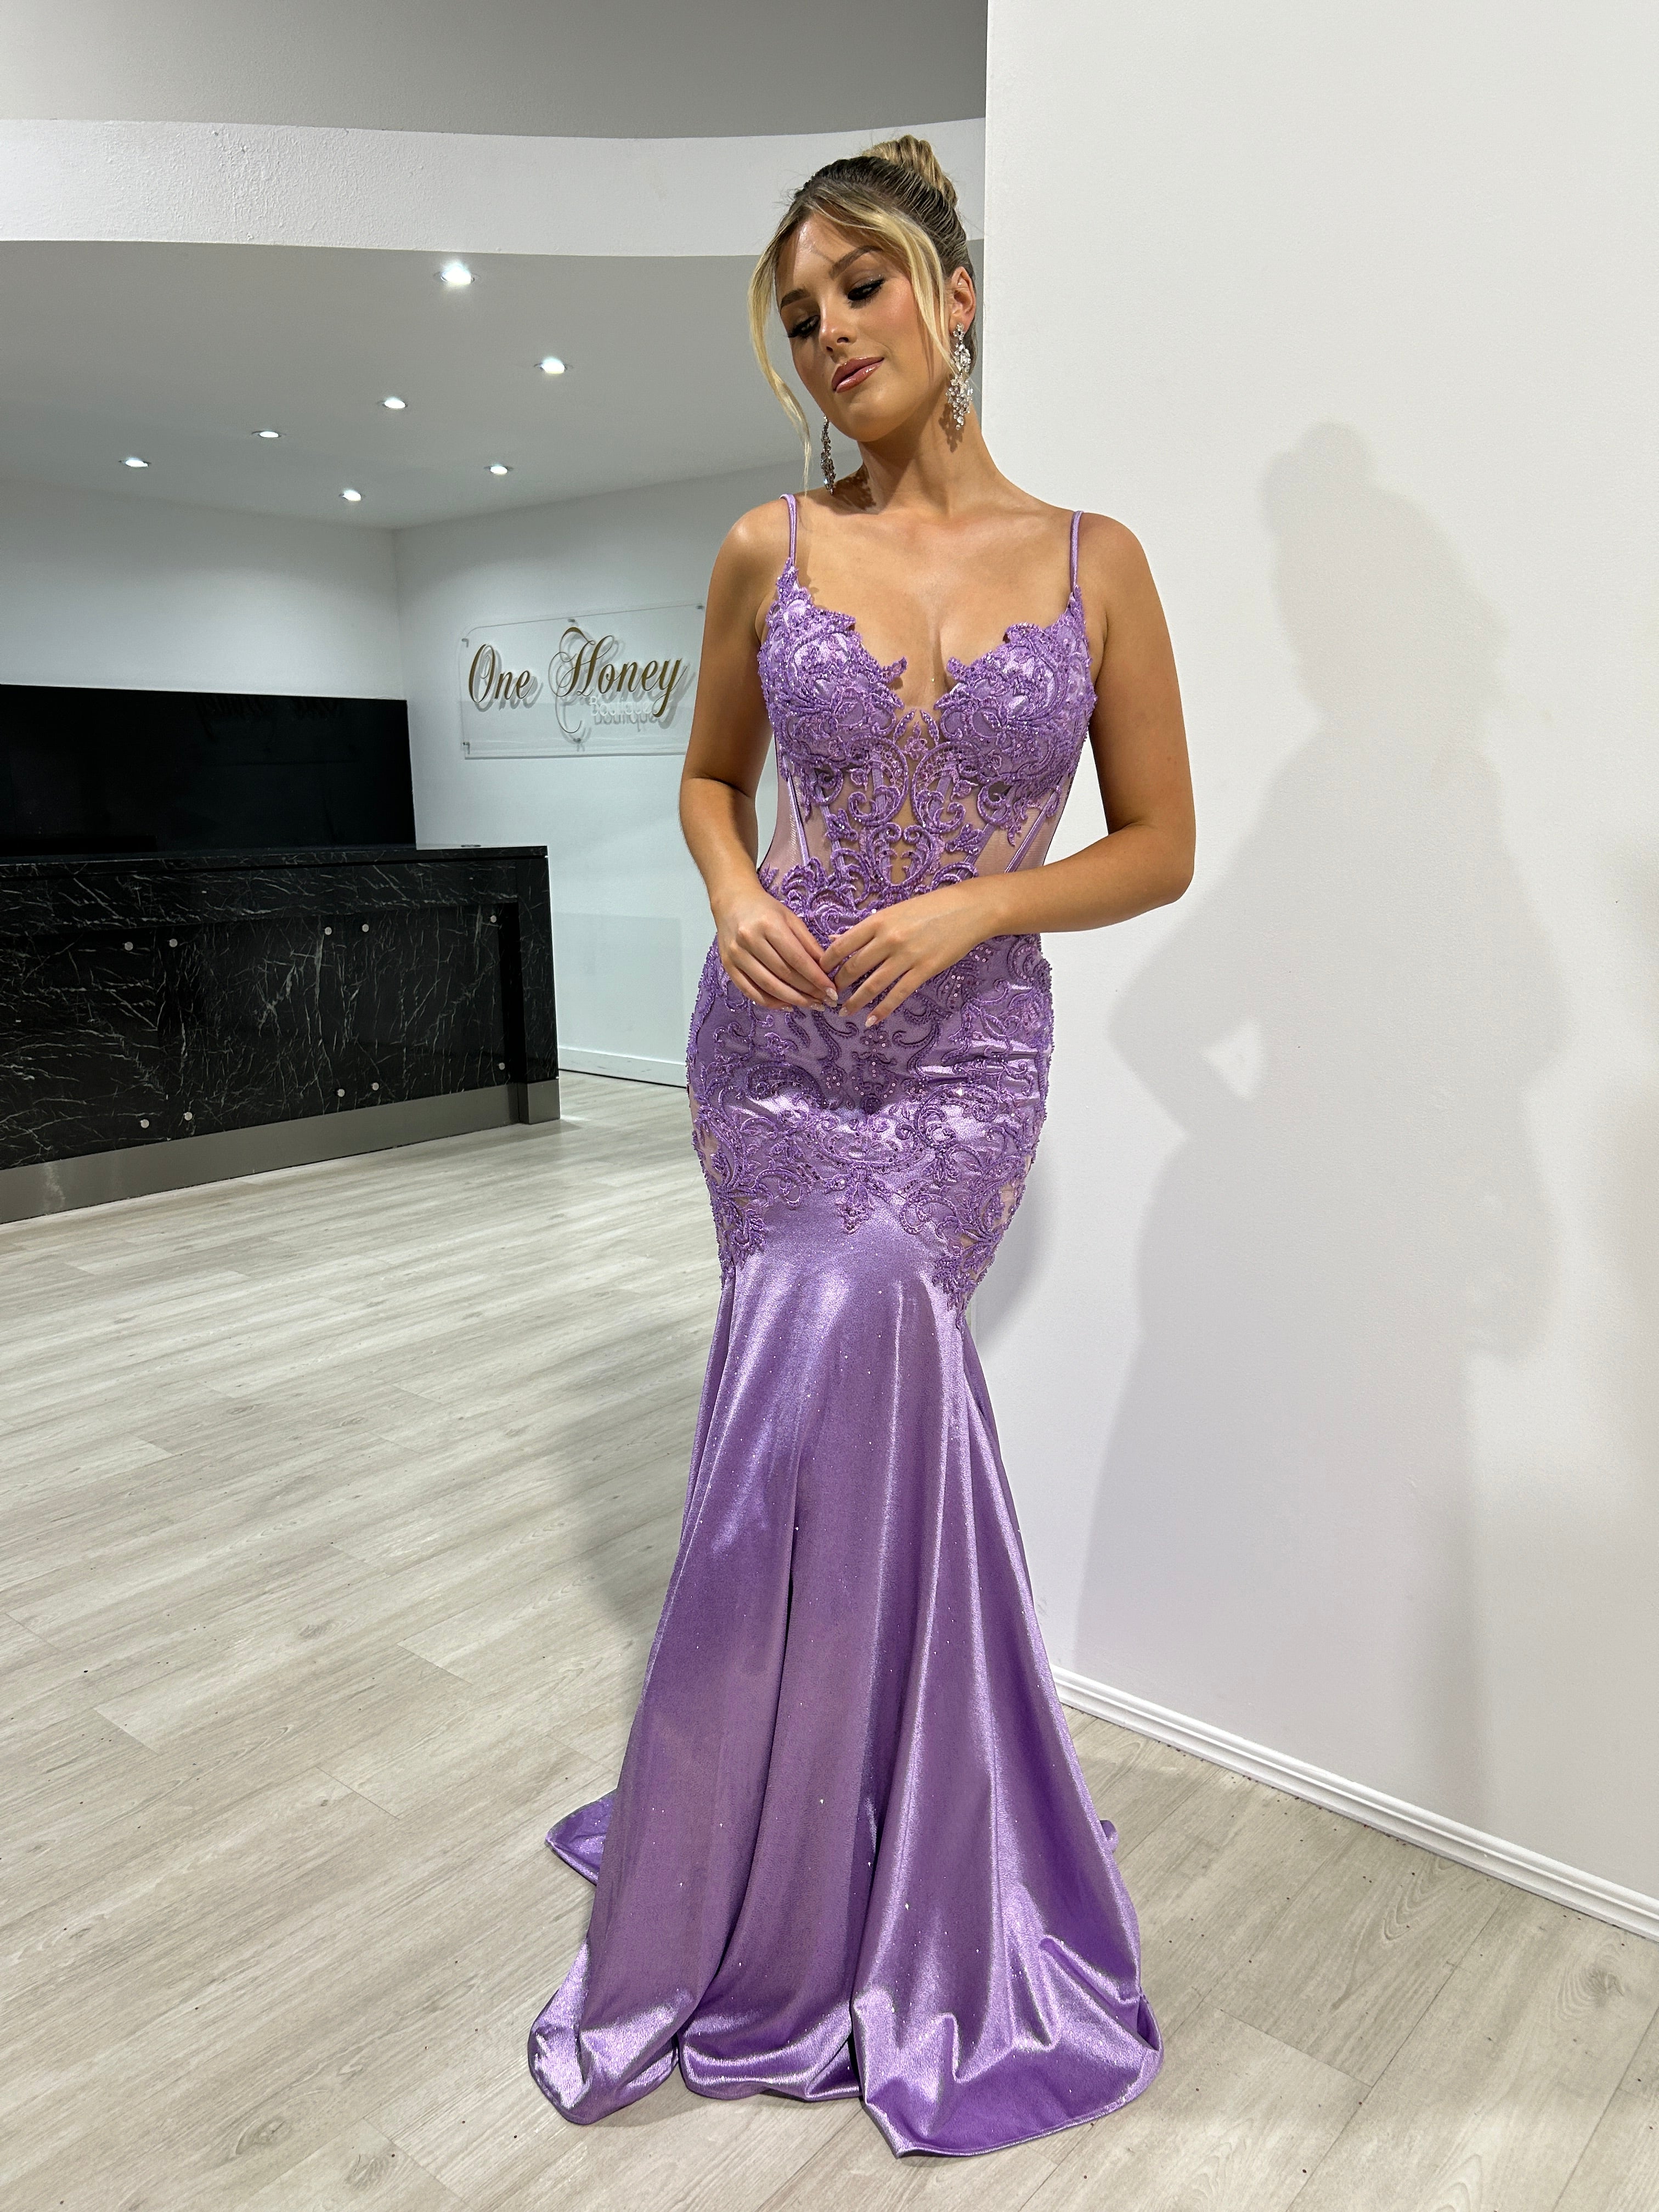 Honey Couture JEAN Lavender Lace and Glitter Fishtail Mermaid Formal Dress